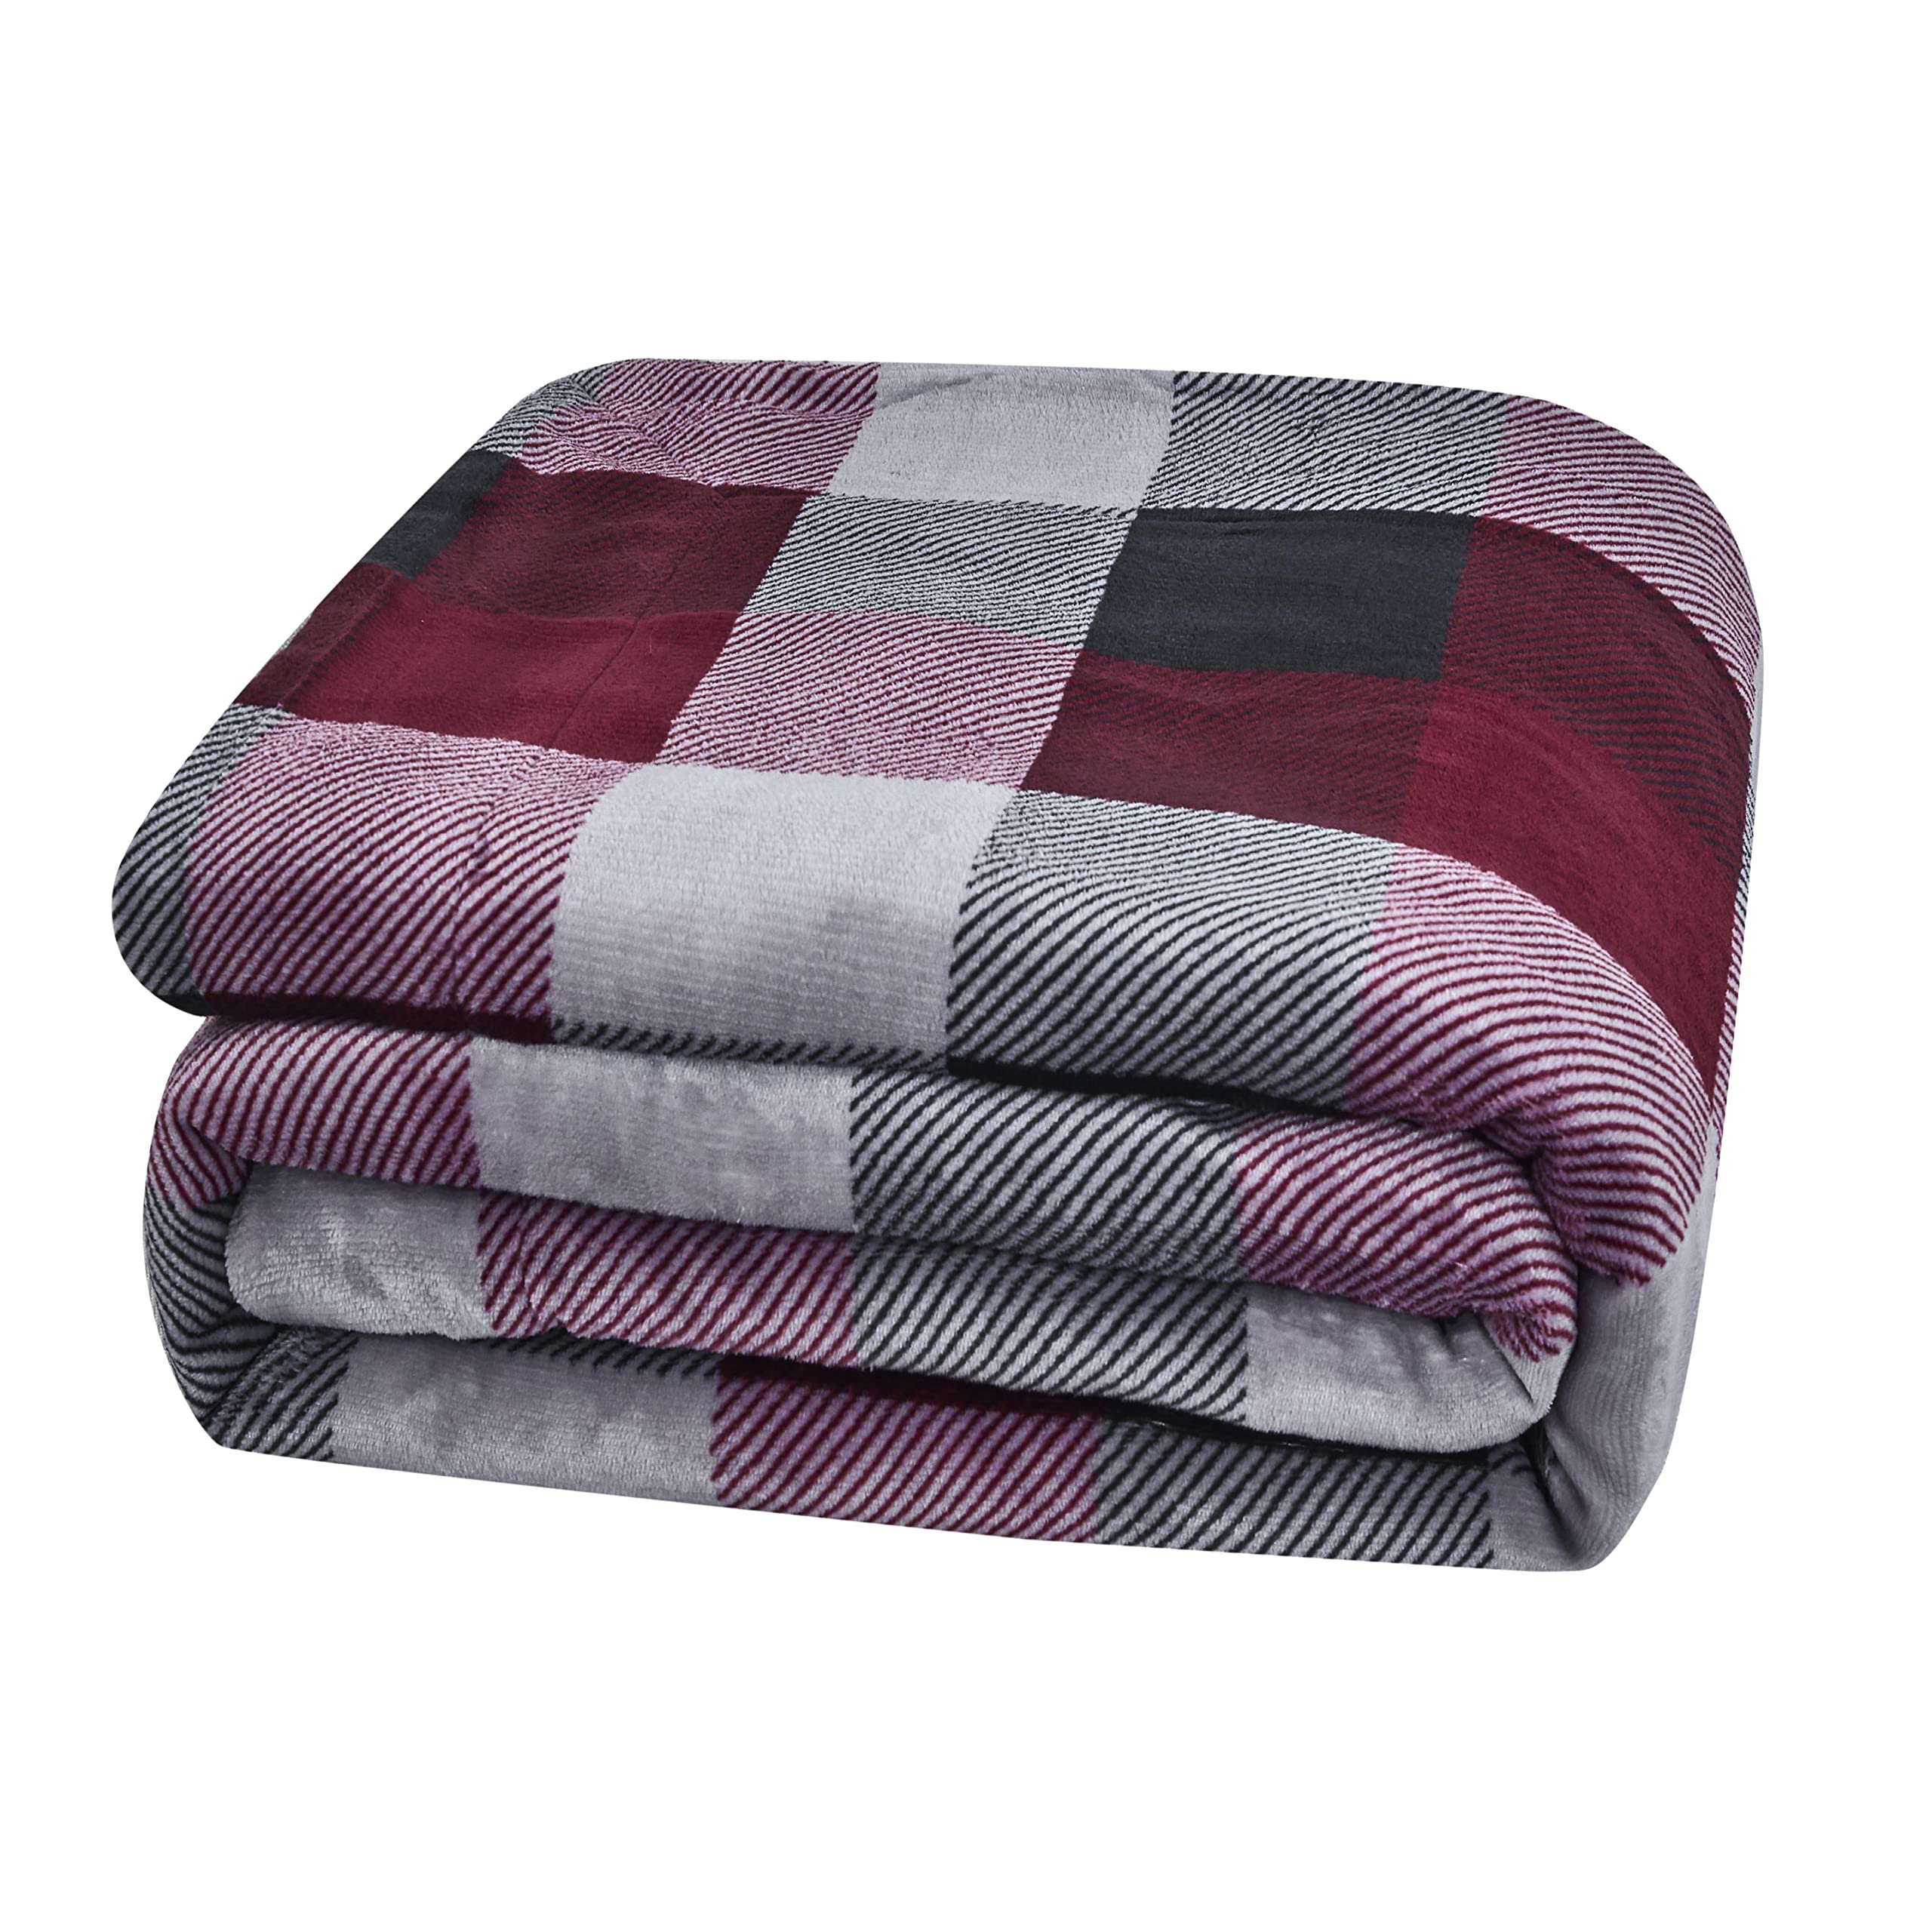 Camping Couch Bed Sherpa Flannel Blanket Throw Size 50 x 70 inches Plush Throw Blanket for Sofa Travel – Super Soft Microfiber Blanket 